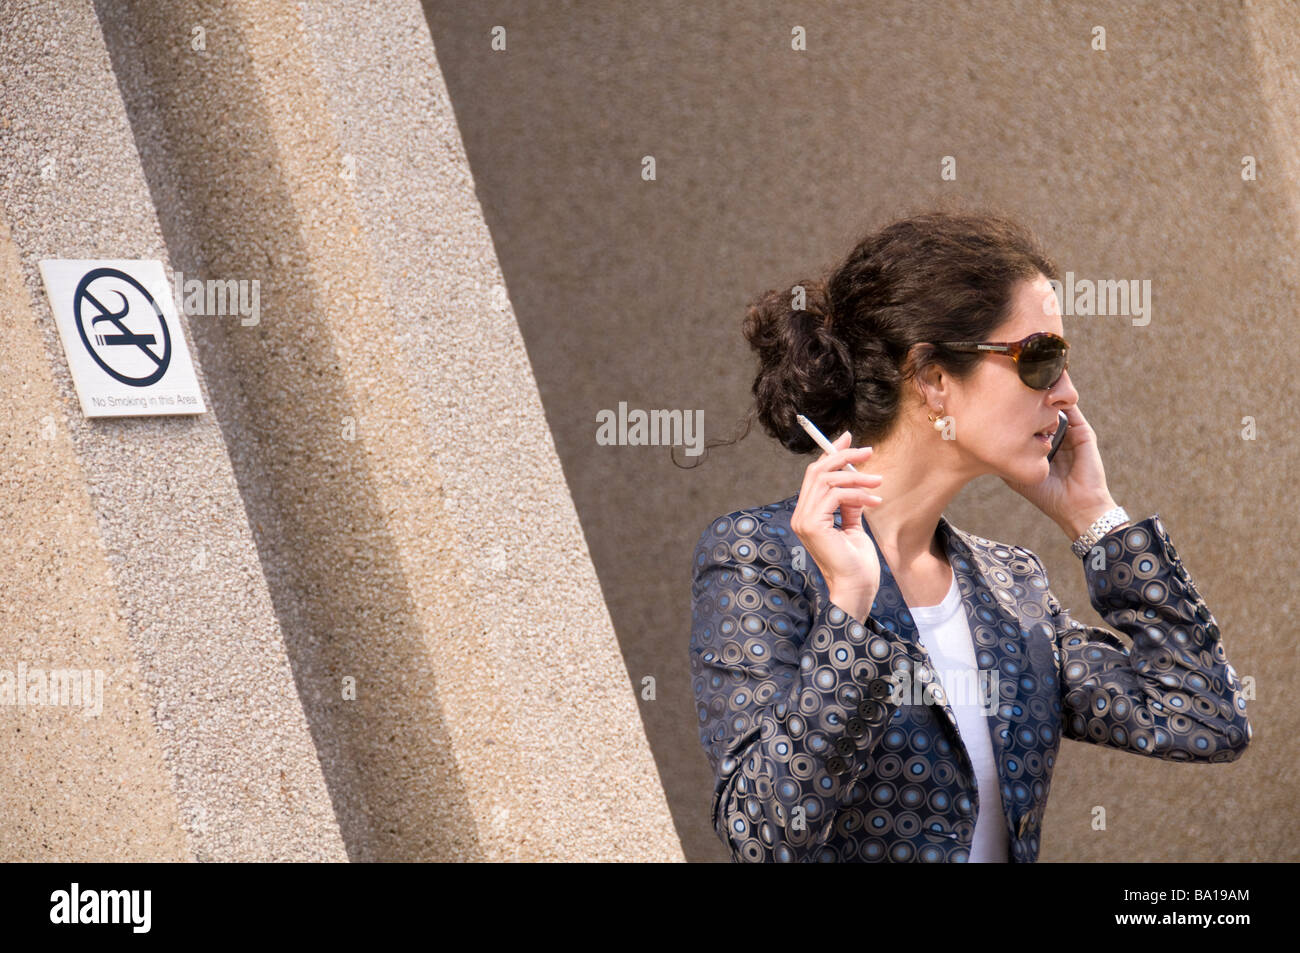 Business woman smoking in front an none smoking sign Stock Photo